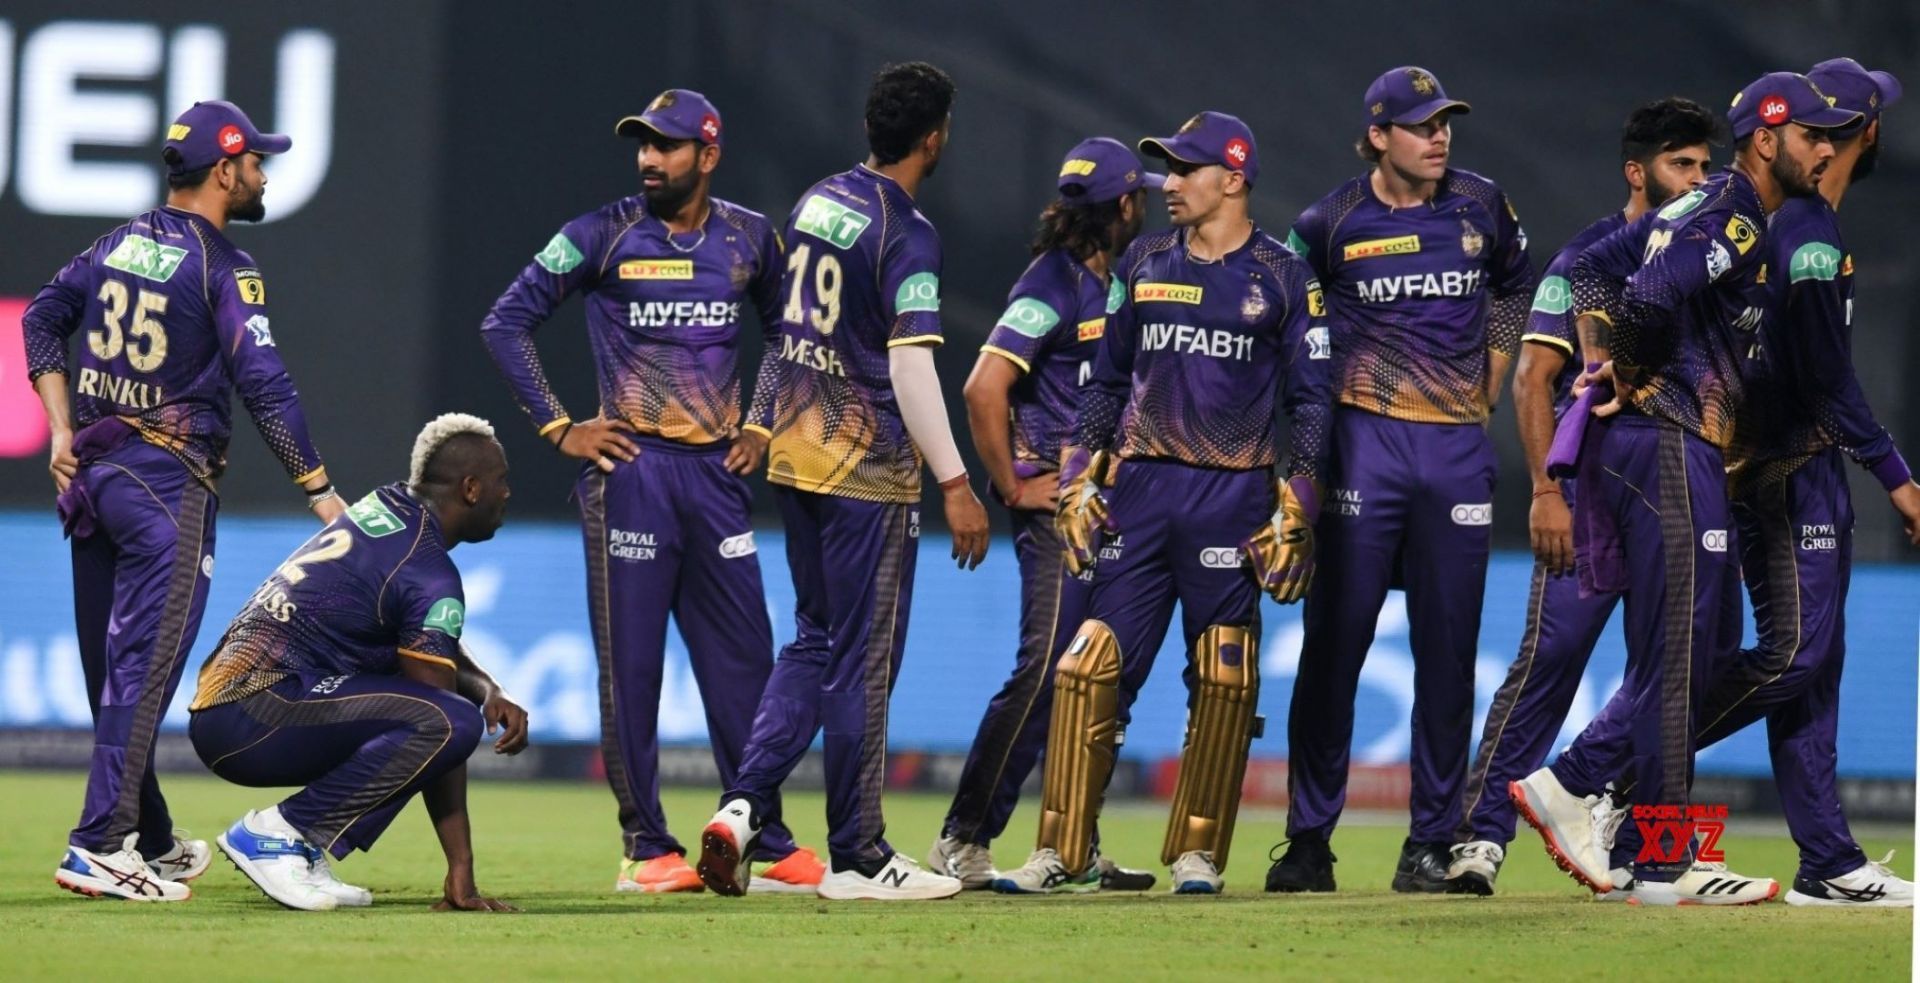 KKR will look to get back to winning ways after back to back losses